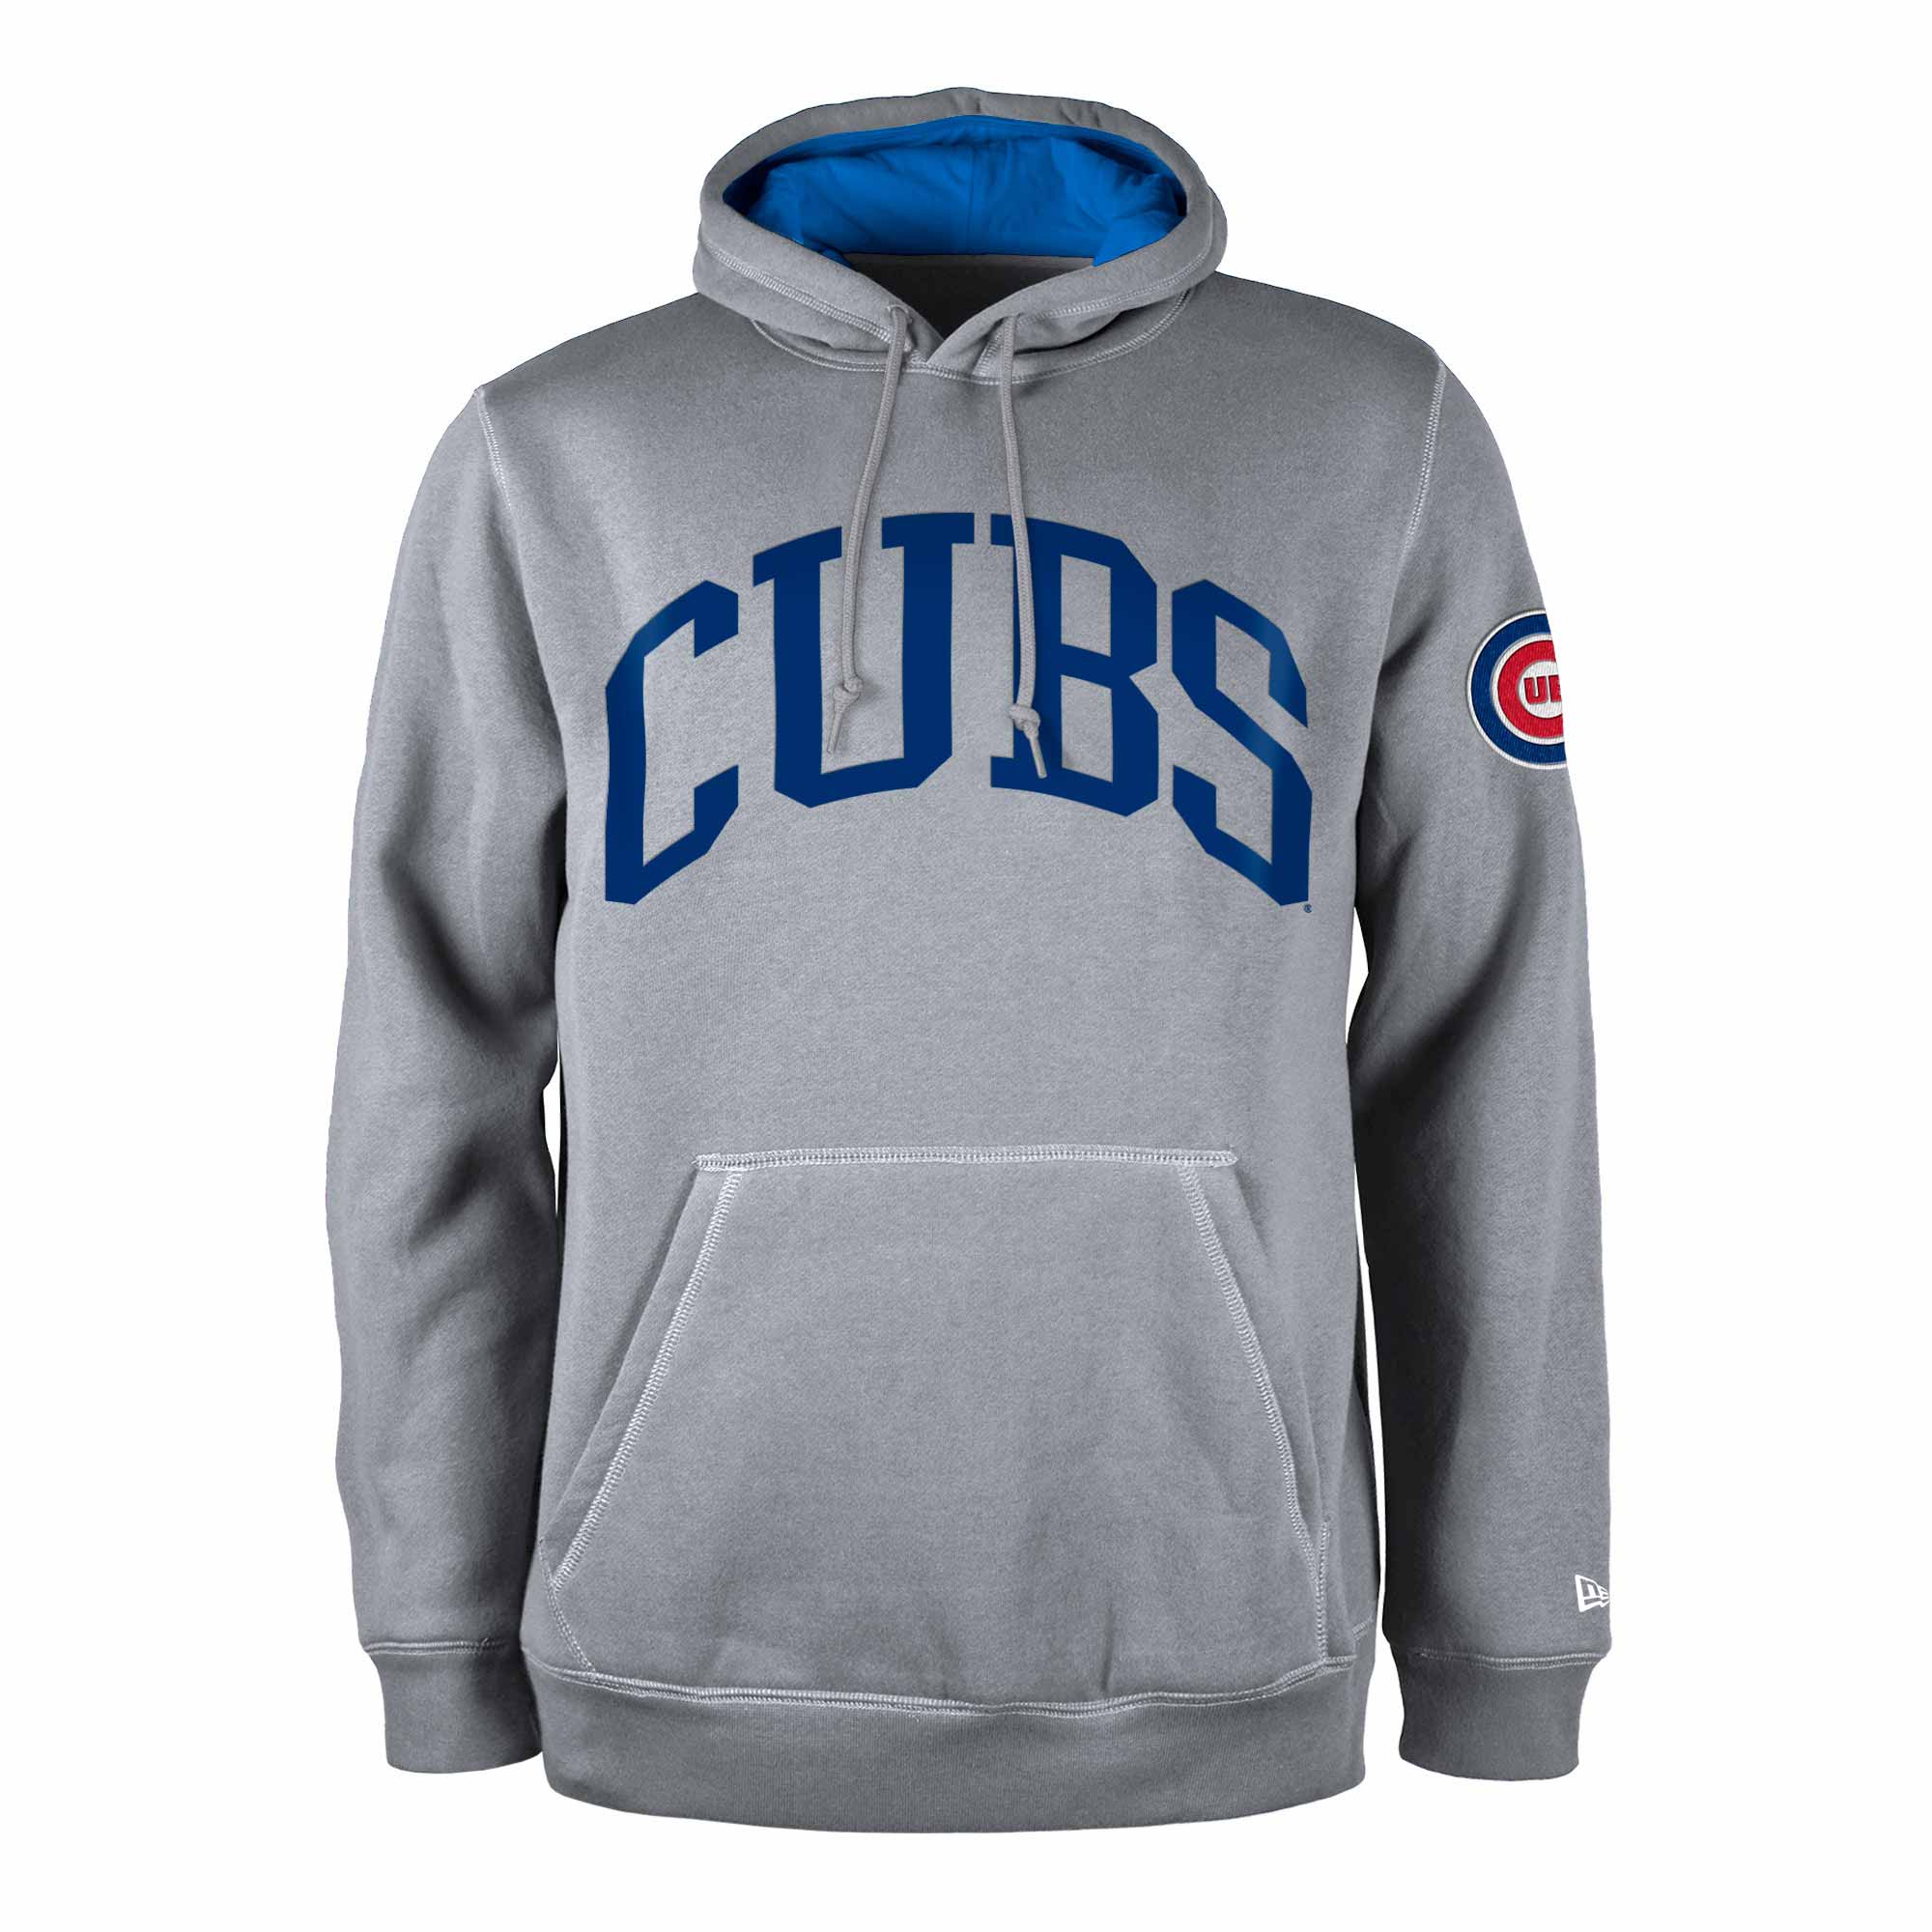 Lids Chicago Cubs New Era Women's Game Day Crew Pullover Sweatshirt - Royal